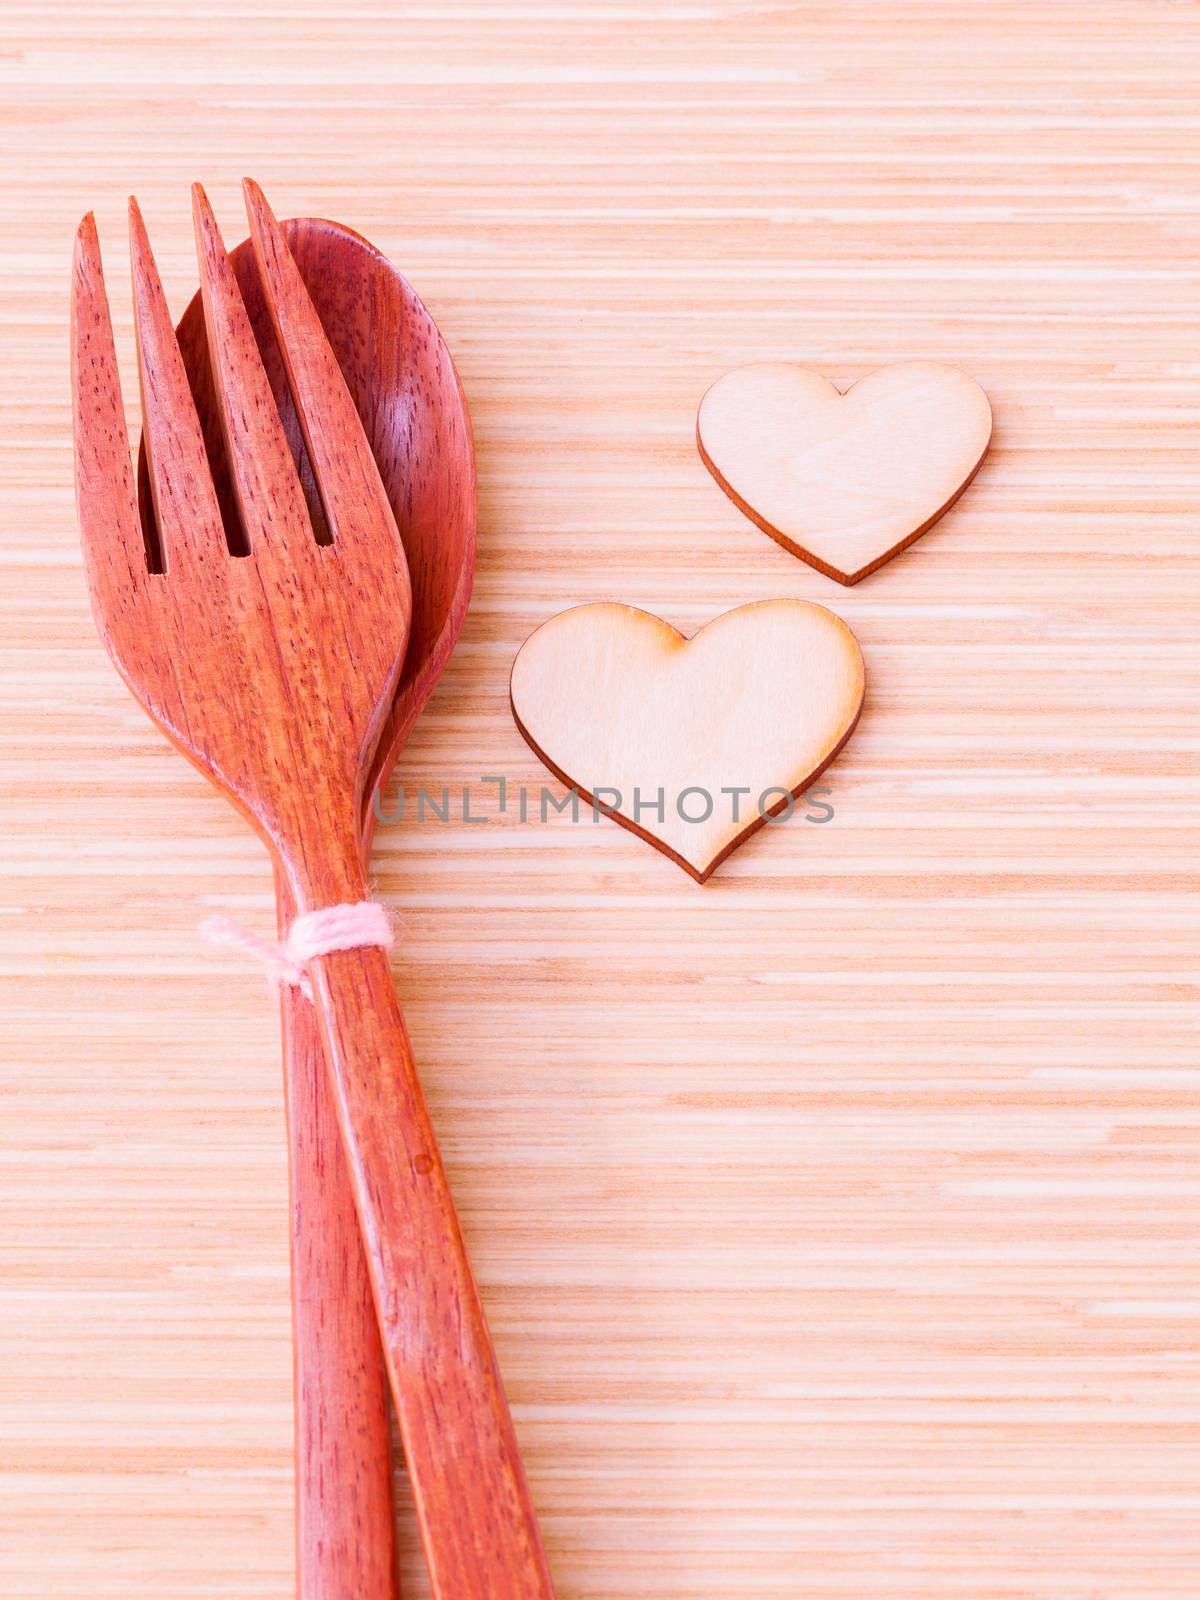 Wooden spoon and fork with wooden shape of heart . - Concept for by kerdkanno